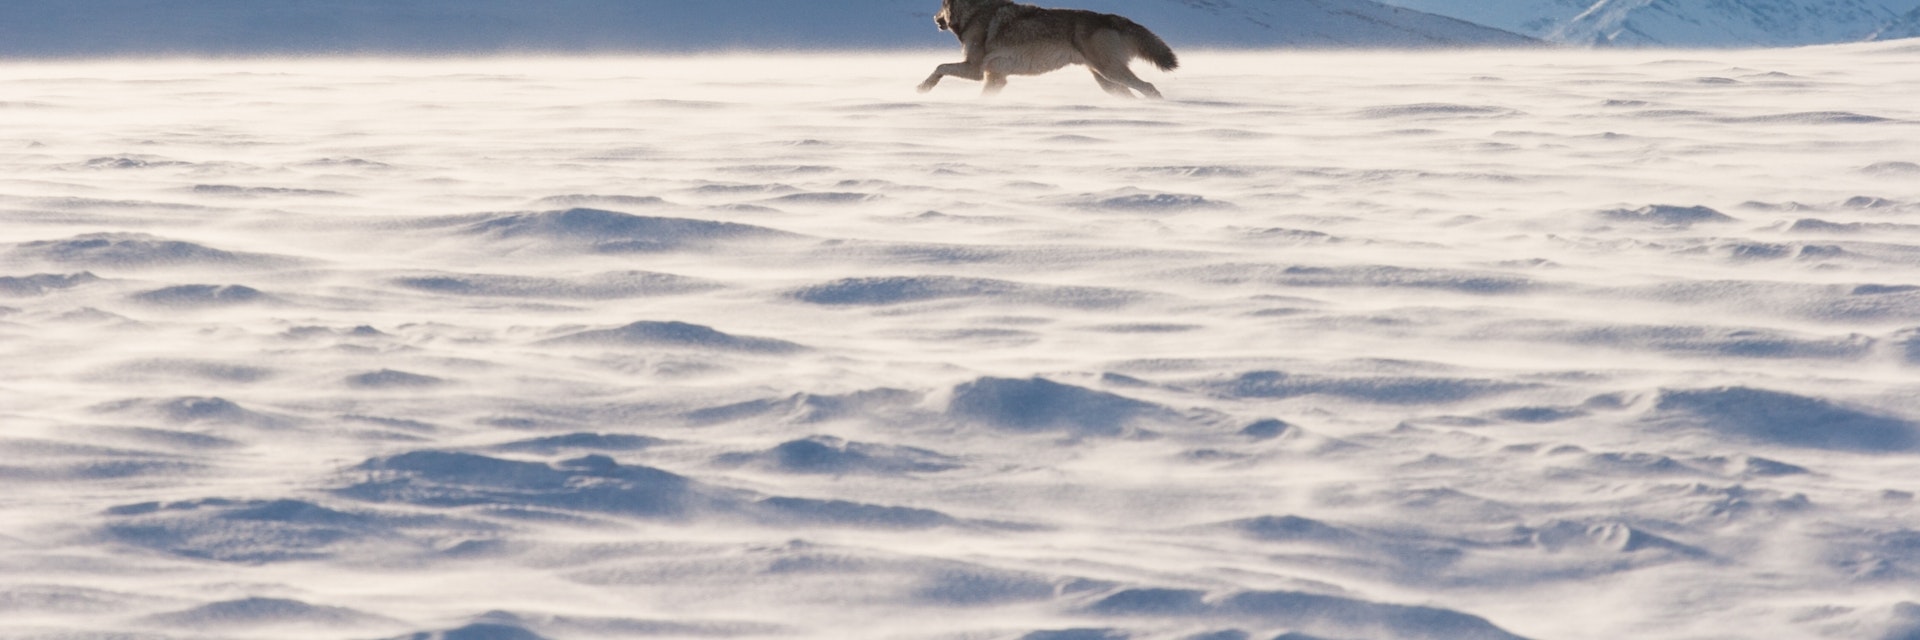 An Alaskan tundra wolf leaps through the blowing snow near the Arctic National Wildlife Refuge, as the Brooks Range looms in the background; Shutterstock ID 378979717; purchase_order: 65050; job: ; client: ; other:
378979717